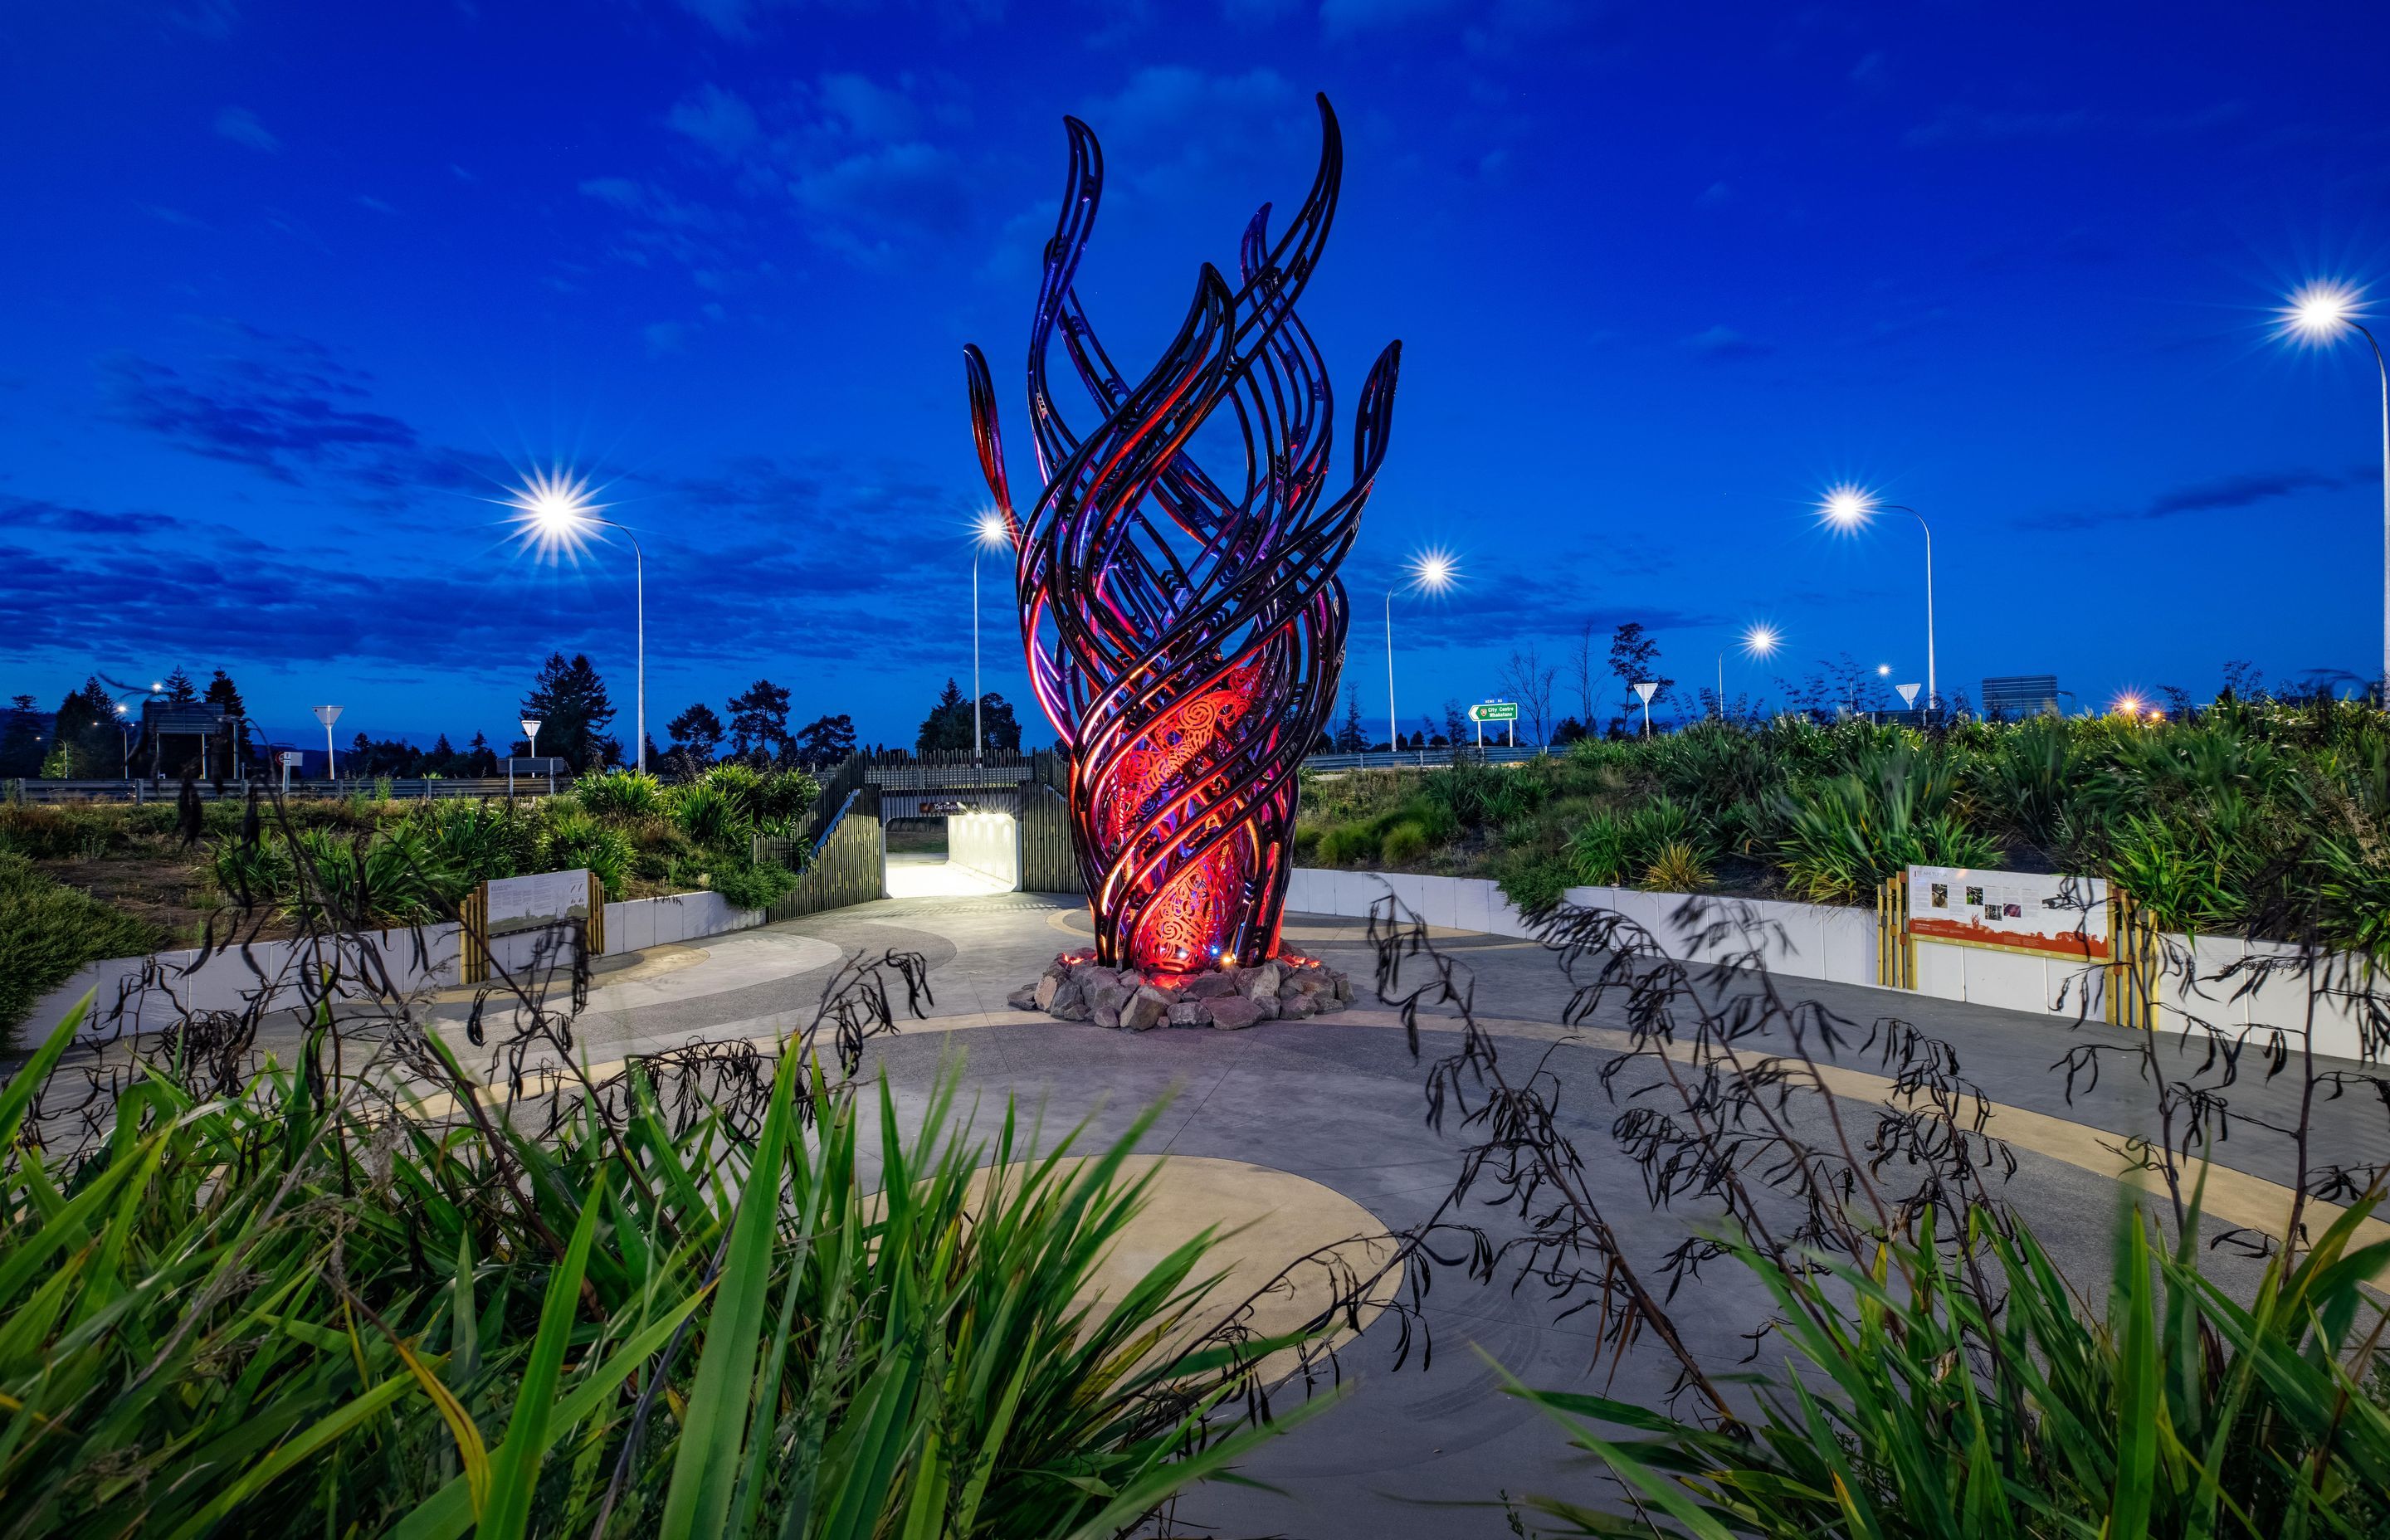 Located at the intersection of State Highways 5 and 30 at the entrance to Rotorua, Te Ahi Tupua—the Eternal Fire—is brought to vivid life thanks to the inclusion of RGBW lighting.